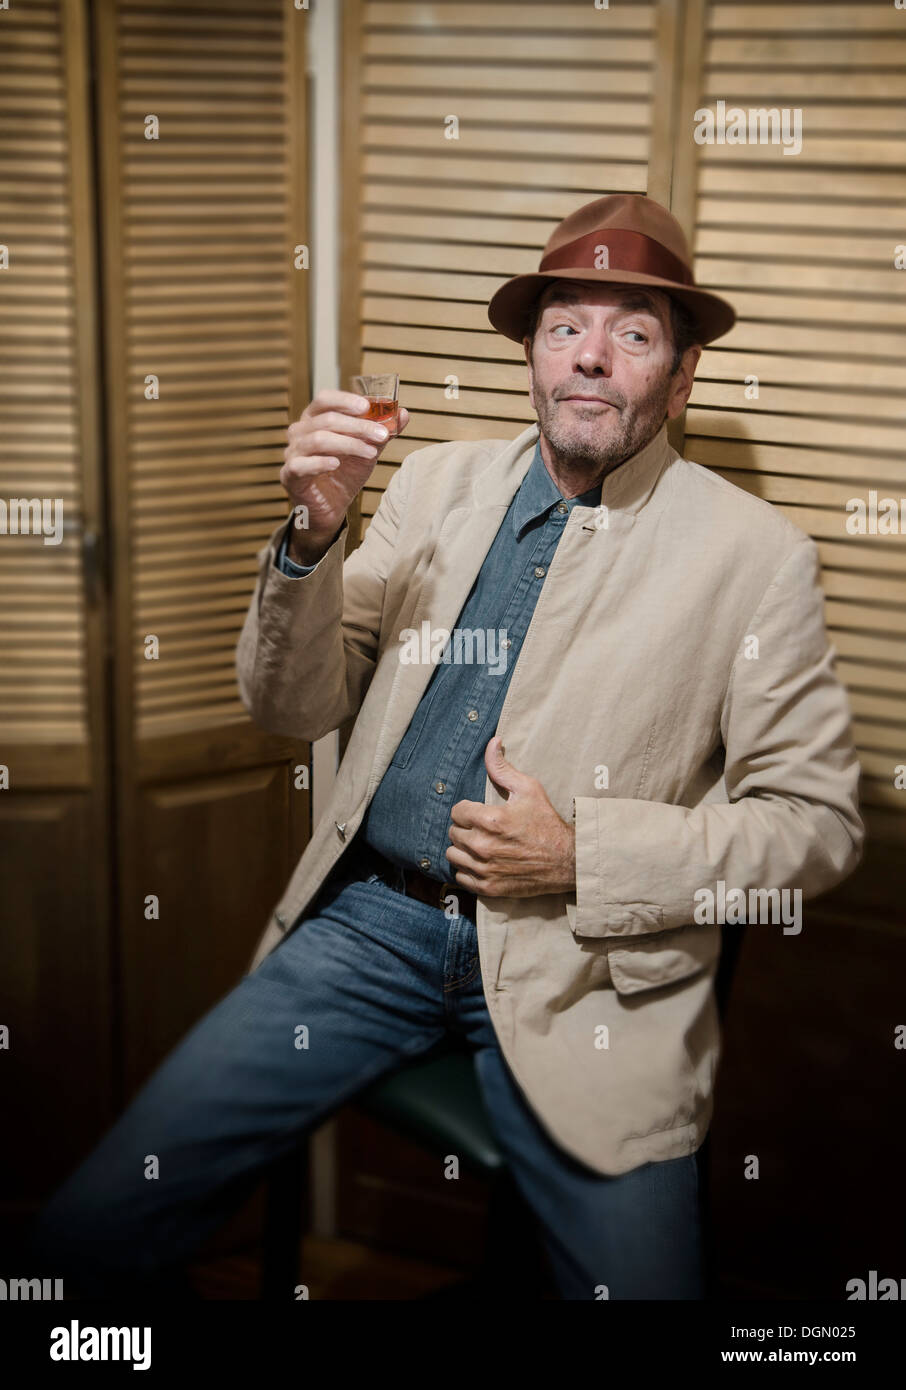 convivial man drinking from shot glass Stock Photo